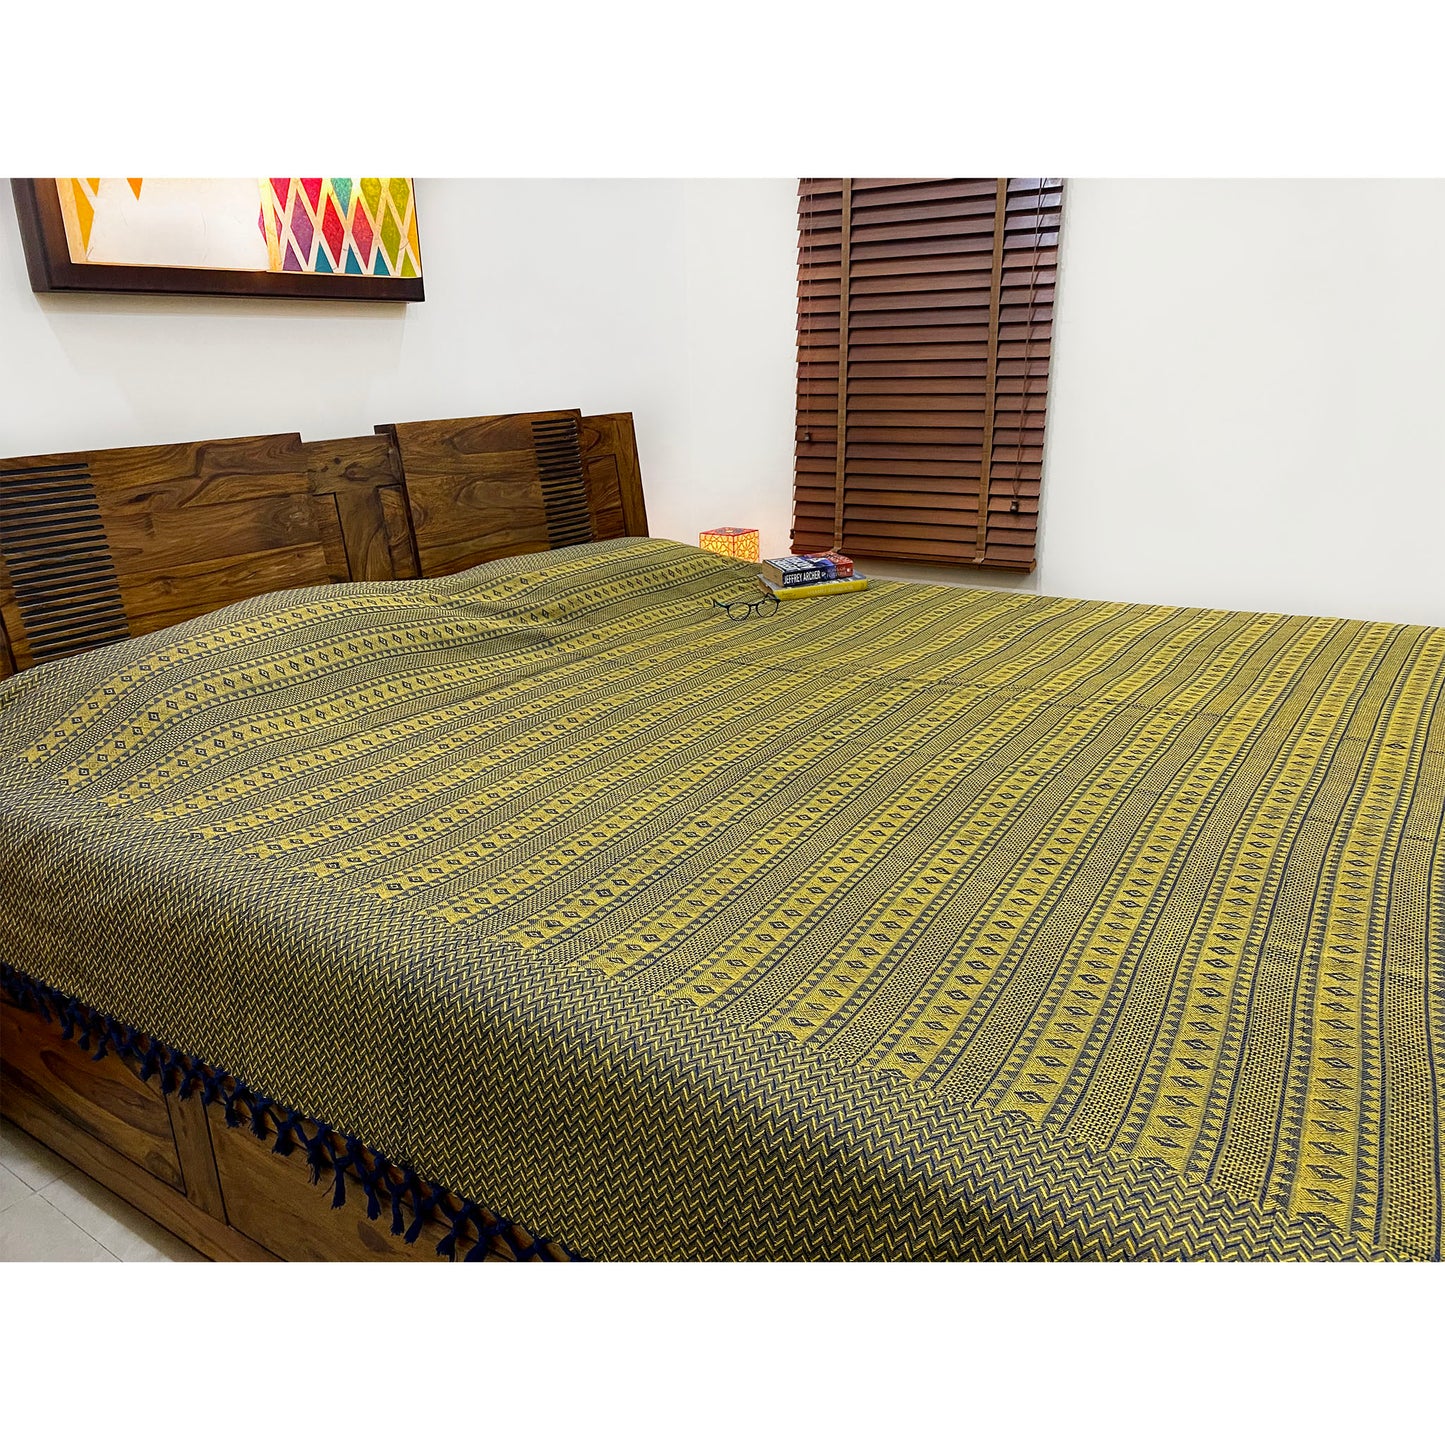 Reversible Mango Pickle Woven Bed Cover